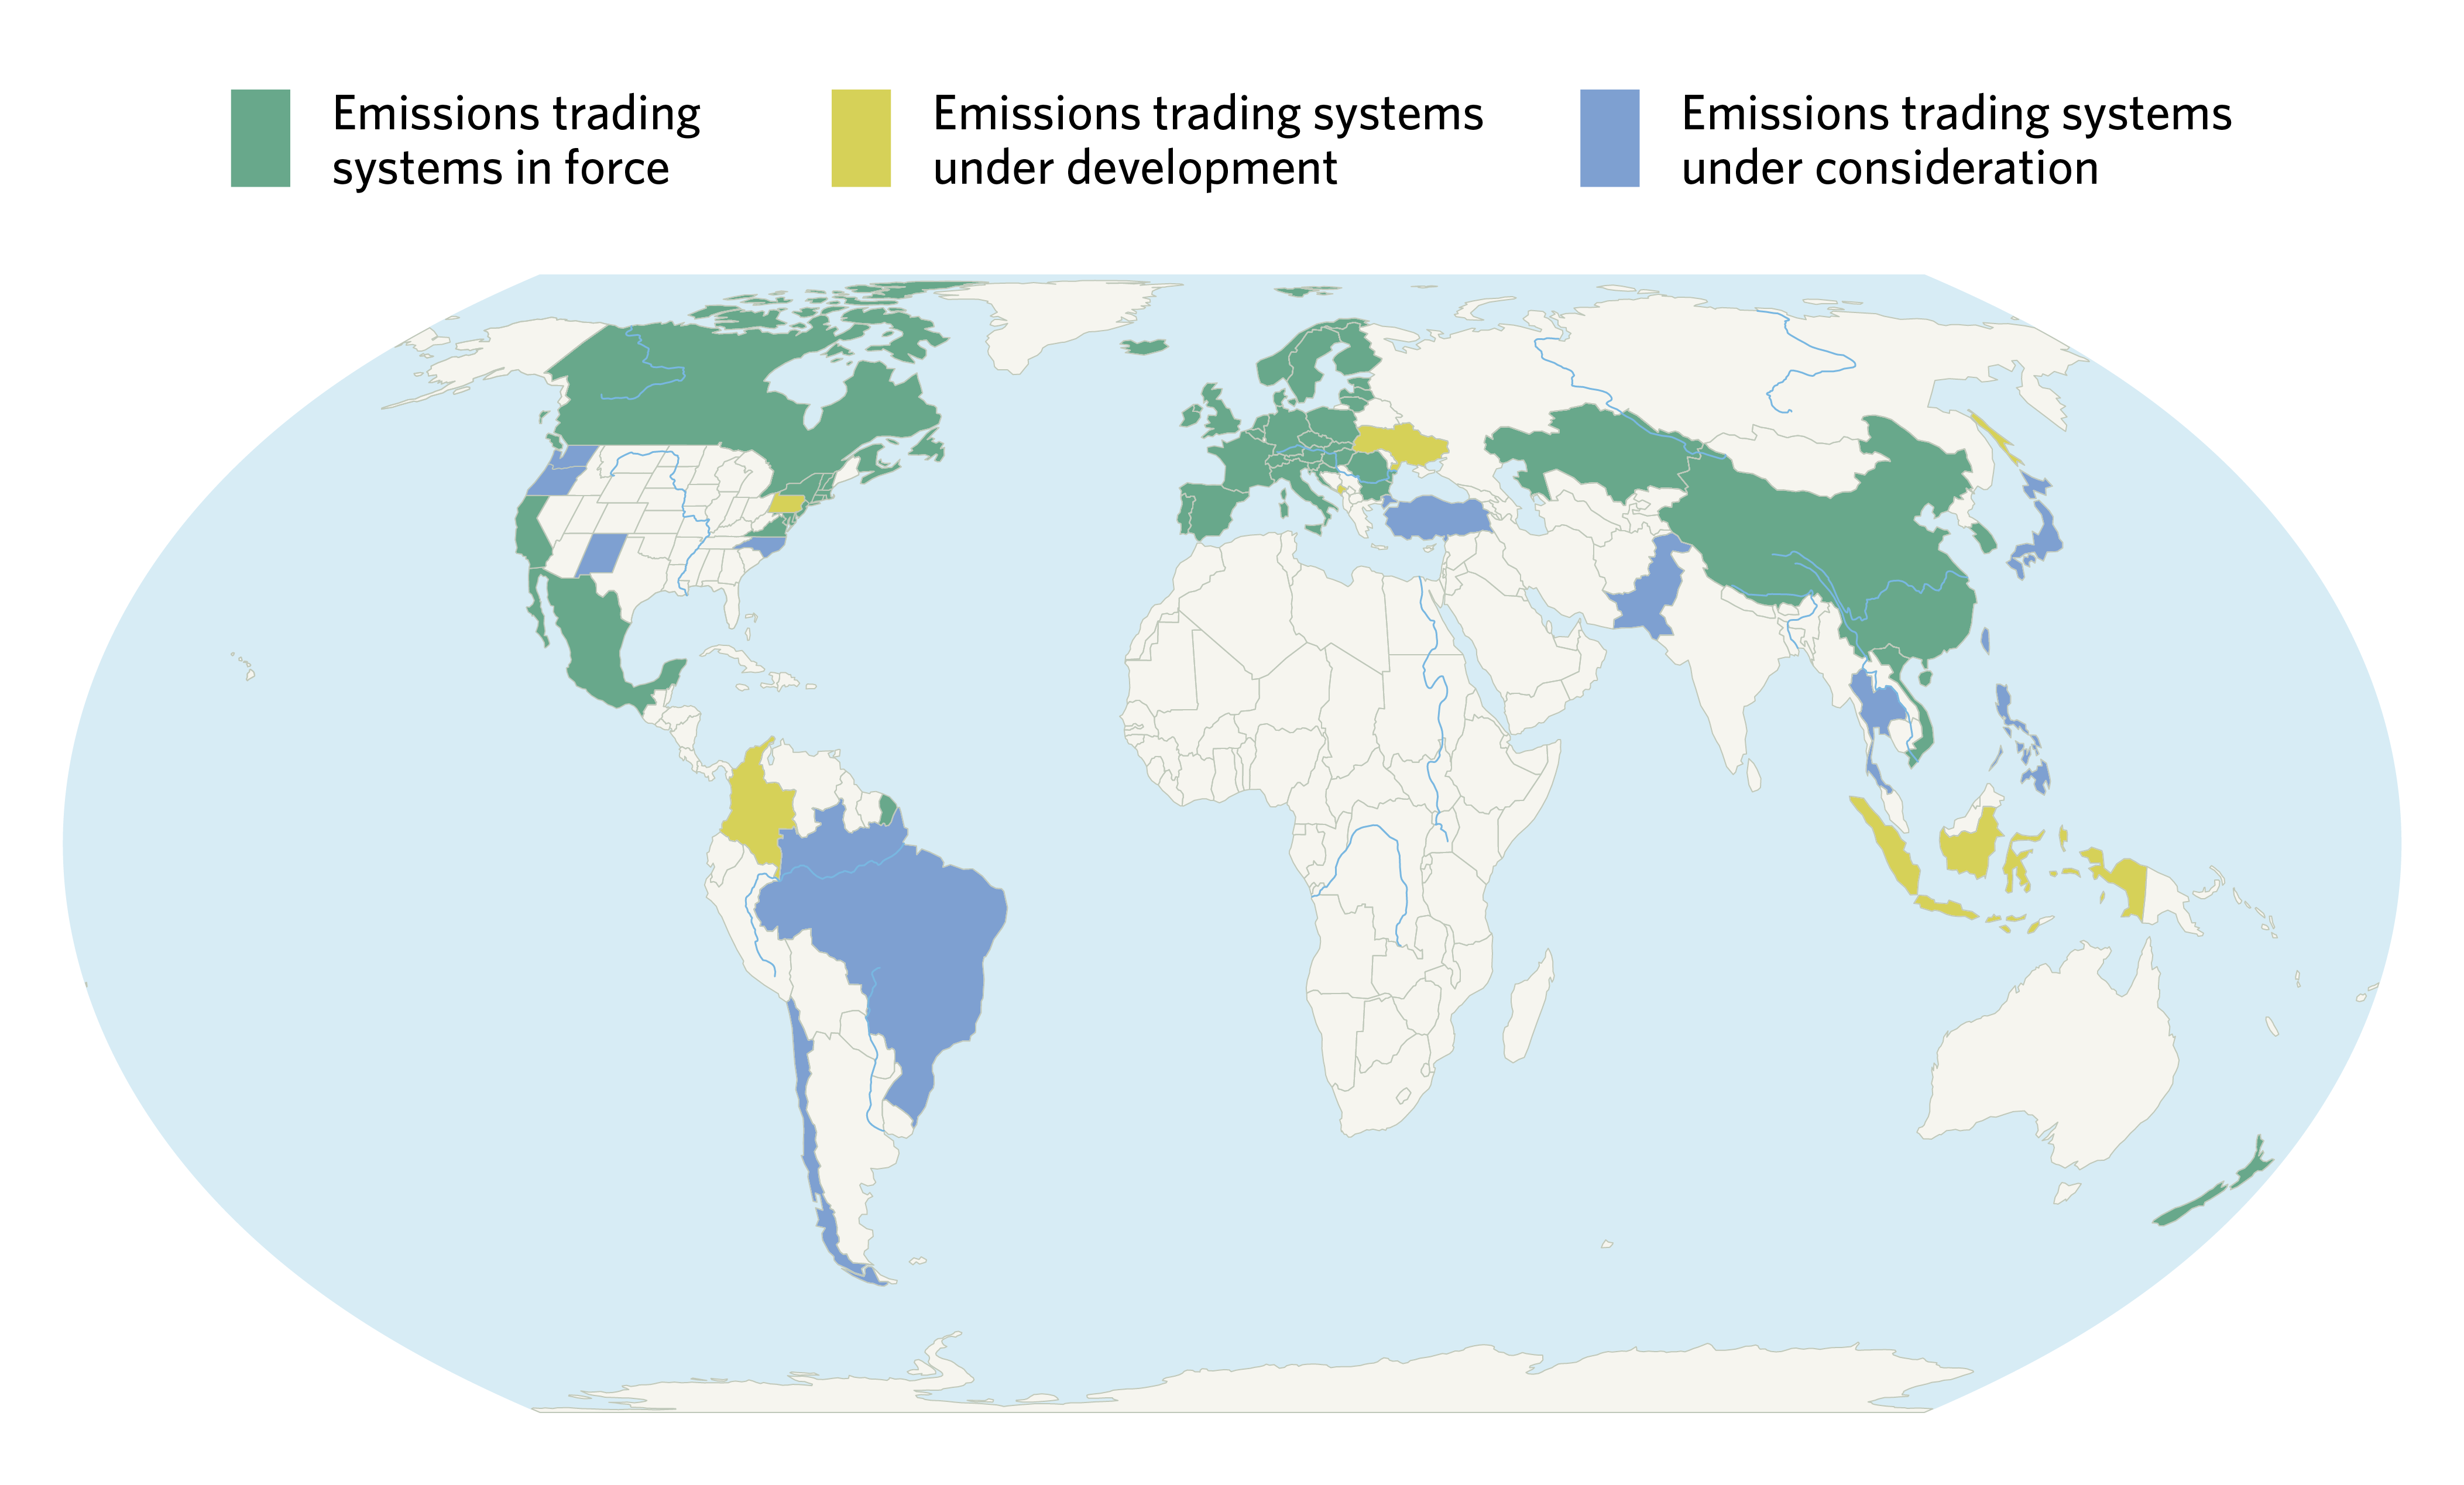 global map with various countries and states across the world highlighted in three different colors indicating emissions trading markets that already exist, are under development, or are under consideration